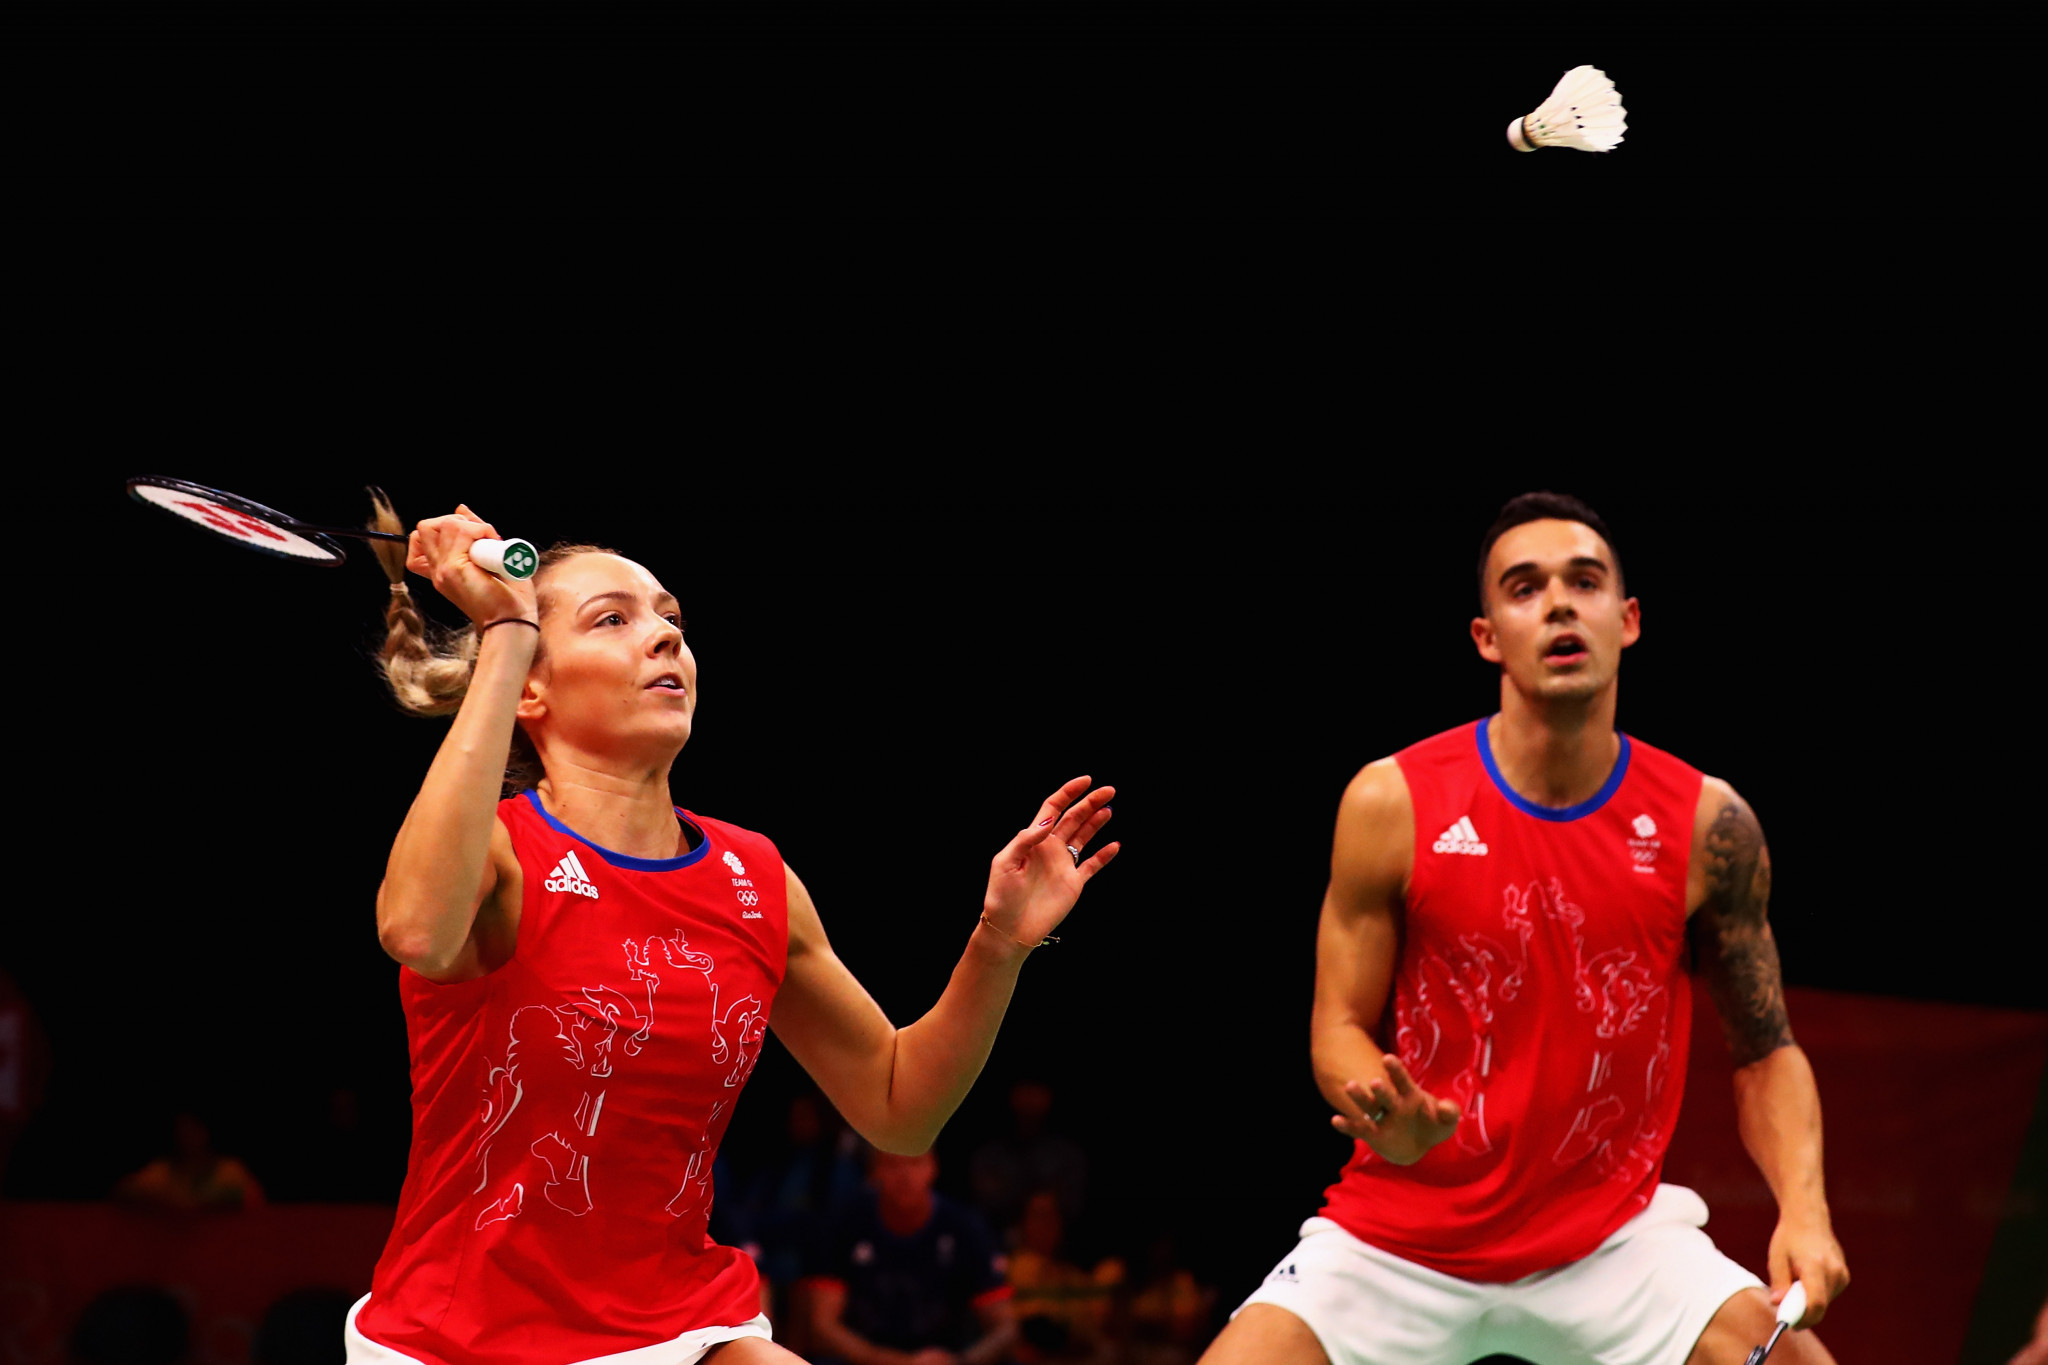 Adcocks to defend mixed doubles badminton title at Gold Coast 2018 as England name team